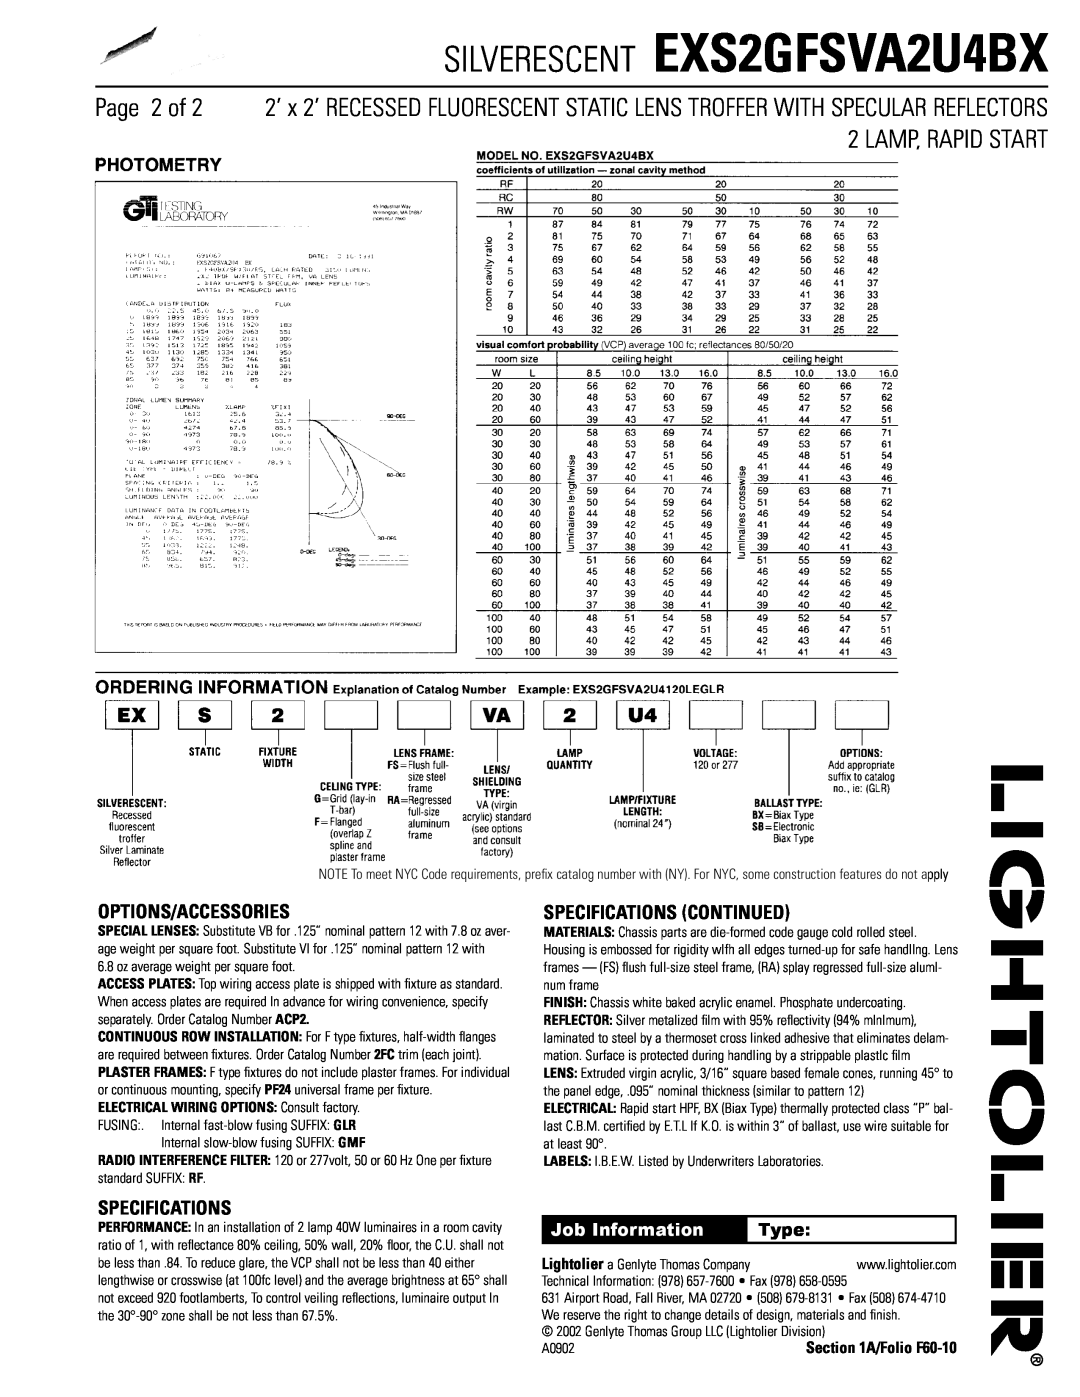 Lightolier manual Options/Accessories, Specifications Continued, SILVERESCENT EXS2GFSVA2U4BX, Job Information, Type 